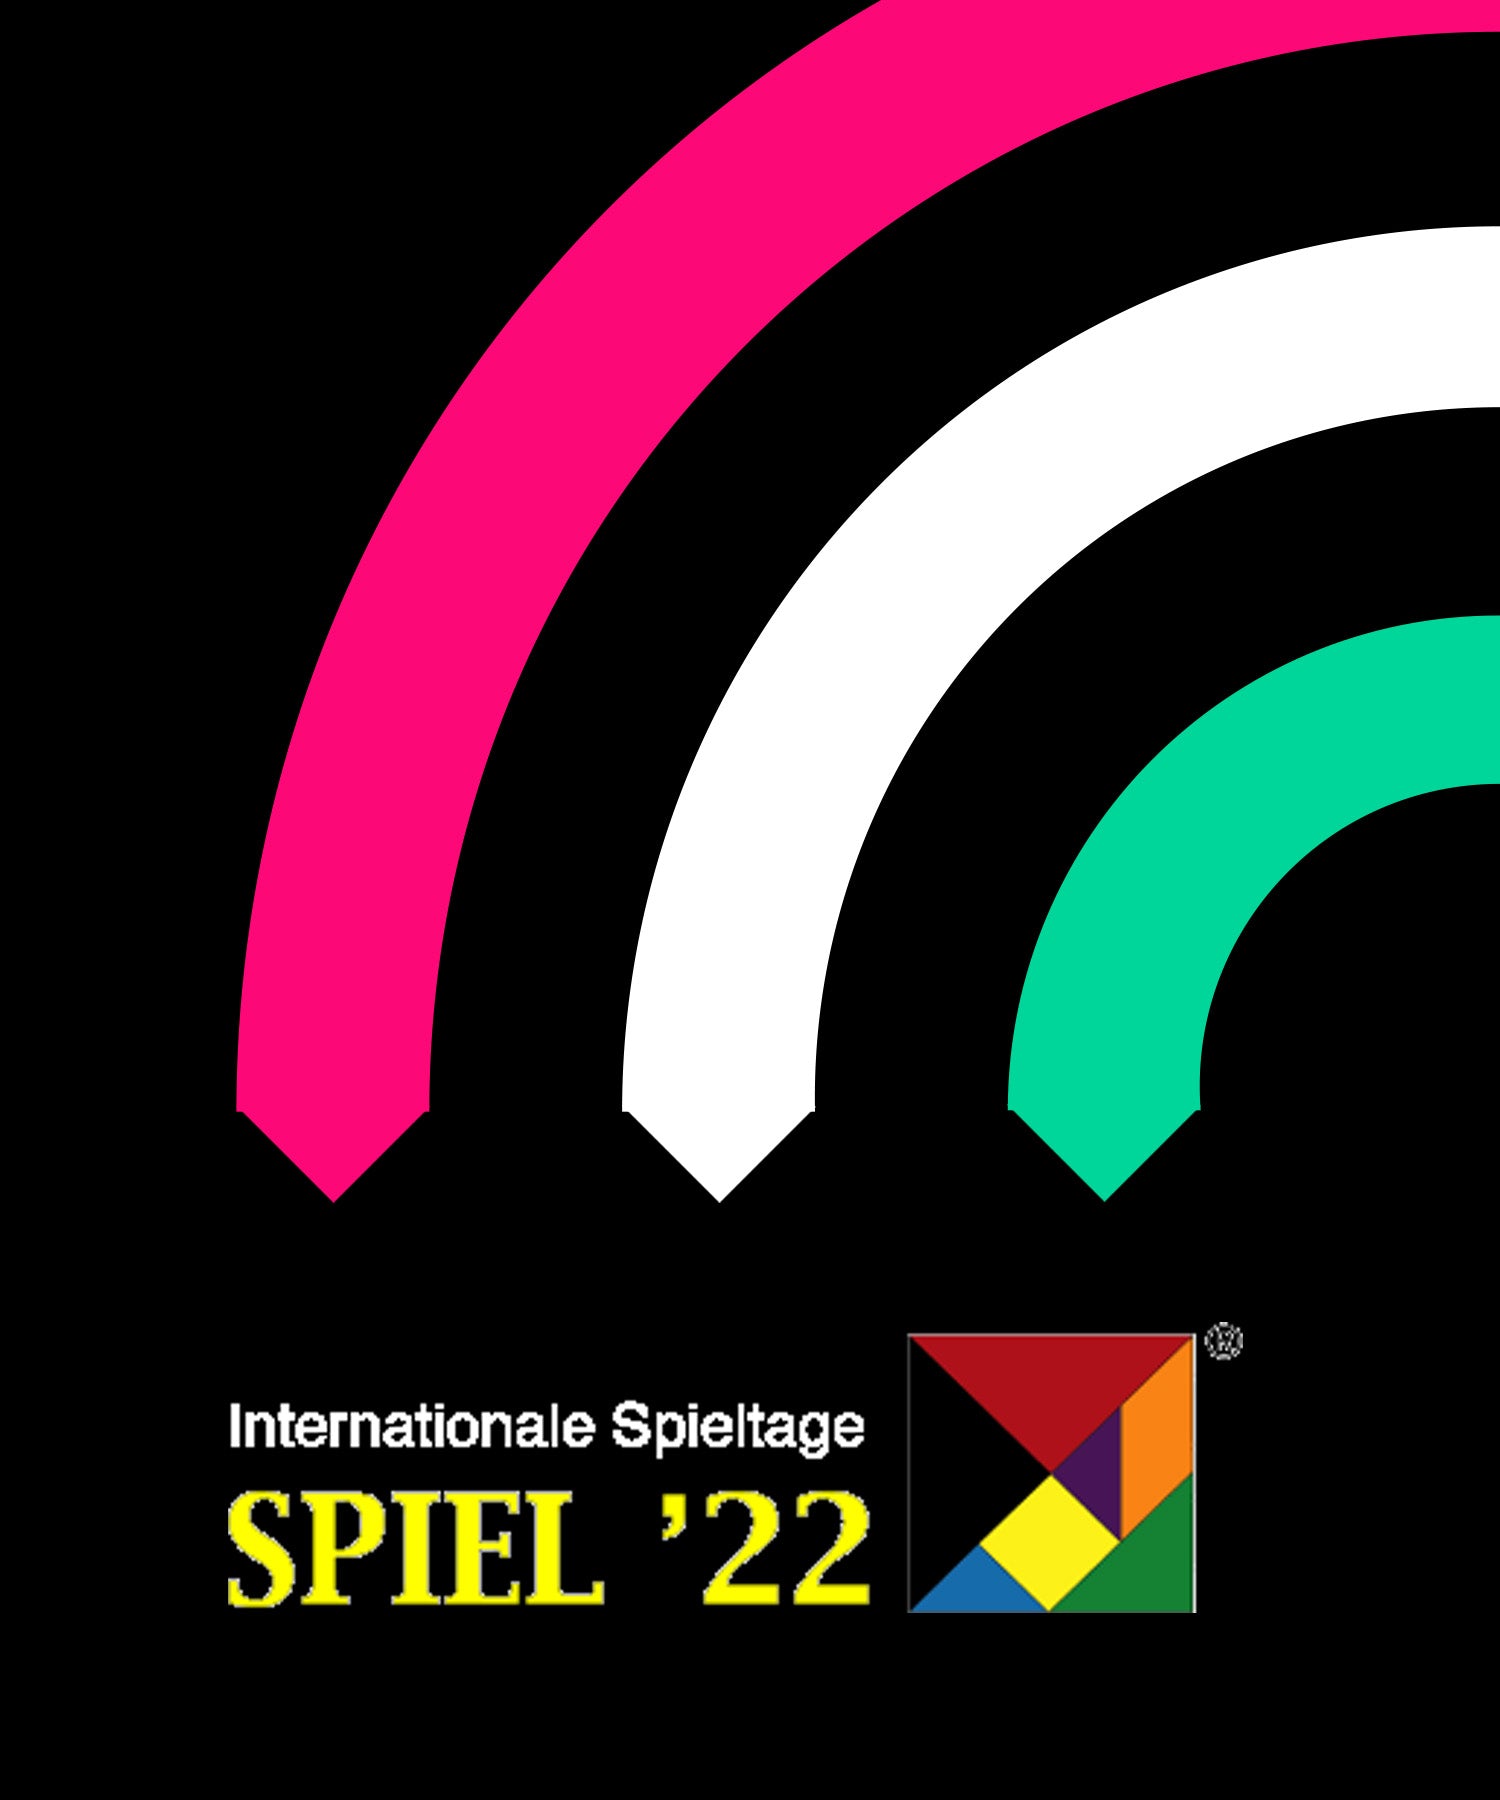 We'll be at Spiel 22 🤩 Hall 4, booth 4A104